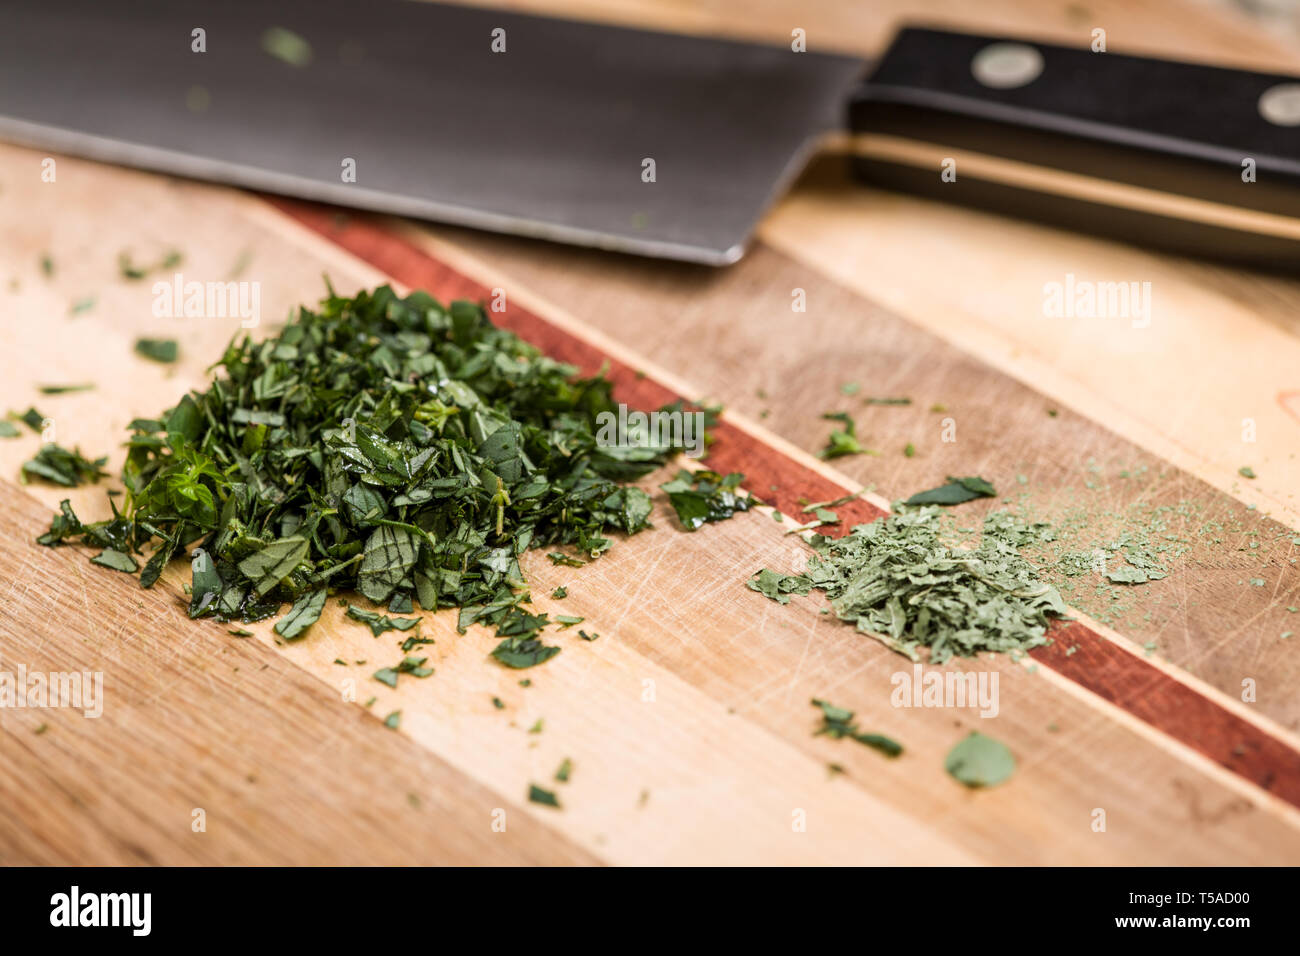 Chopped fresh and dried oregano ready to use in homemade pizza sauce Stock Photo